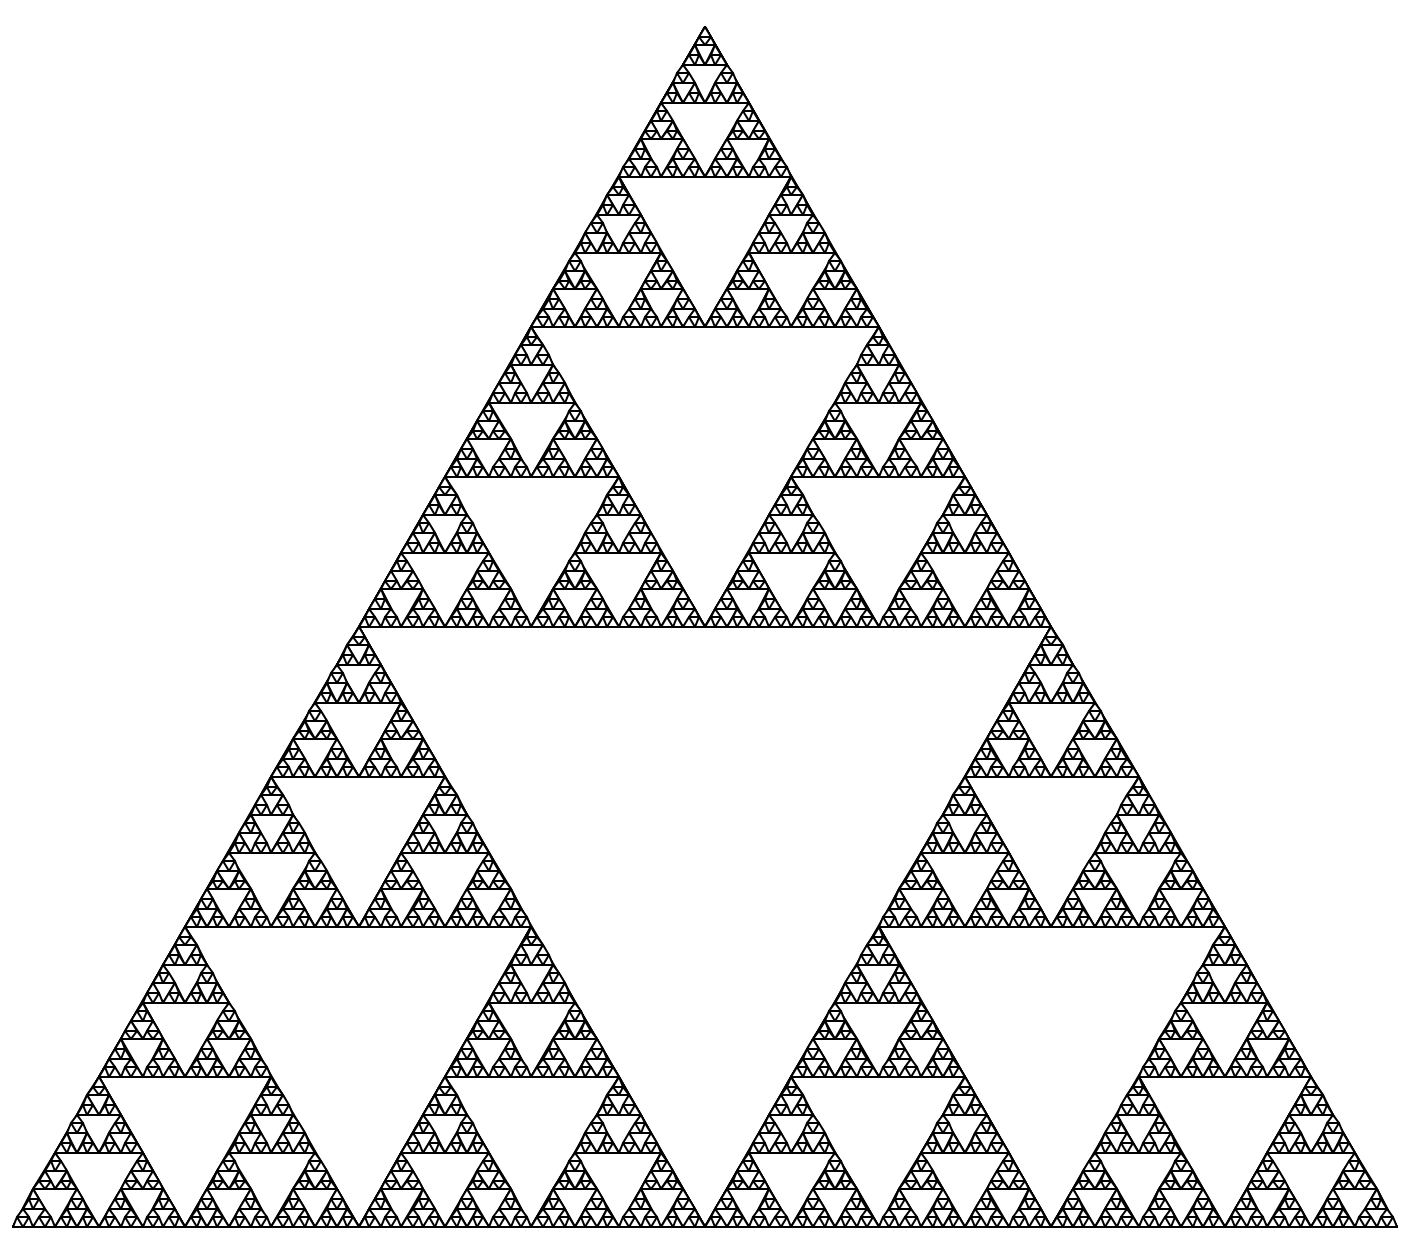 A Sierpinski triangle, which is an equilateral triangle pointing upwards. Inside this triangle there is an equilateral triangle pointing downwards, with each of its points in the centre of the sides of the larger circle. This inner triangle divides the outer triangle into three smaller upright equilateral triangles. Inside each of these smaller upright triangles, the pattern is repeated many times (so each one of these triangles is divided into three by an upside-down triangle, then each of those three continue to be divided).